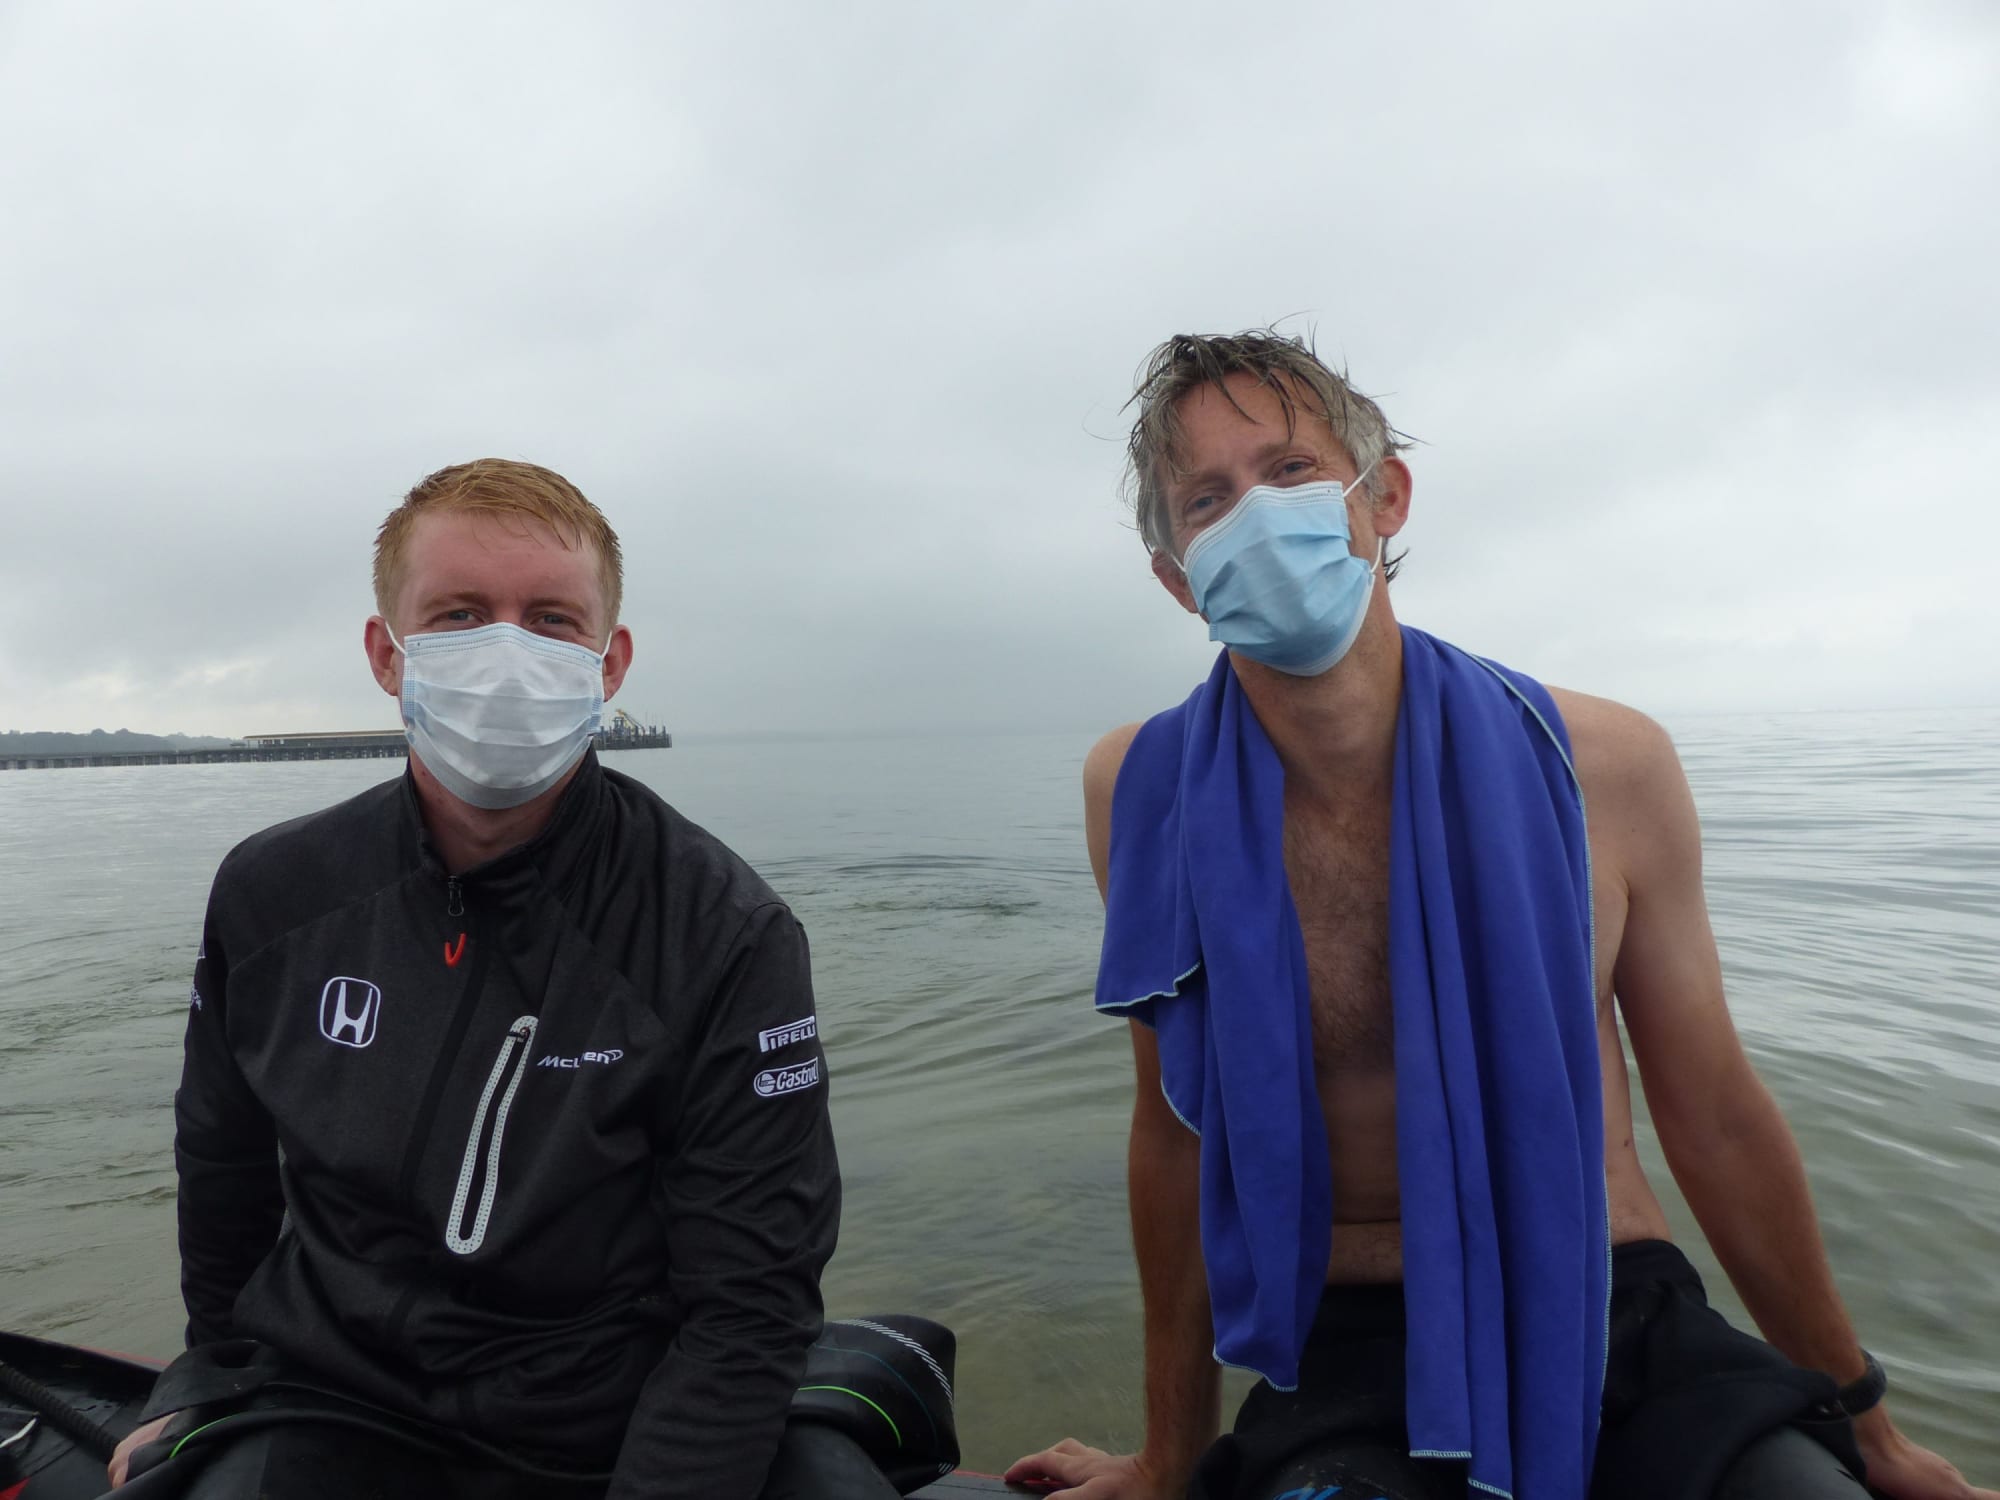 Swimmers in masks on the boat